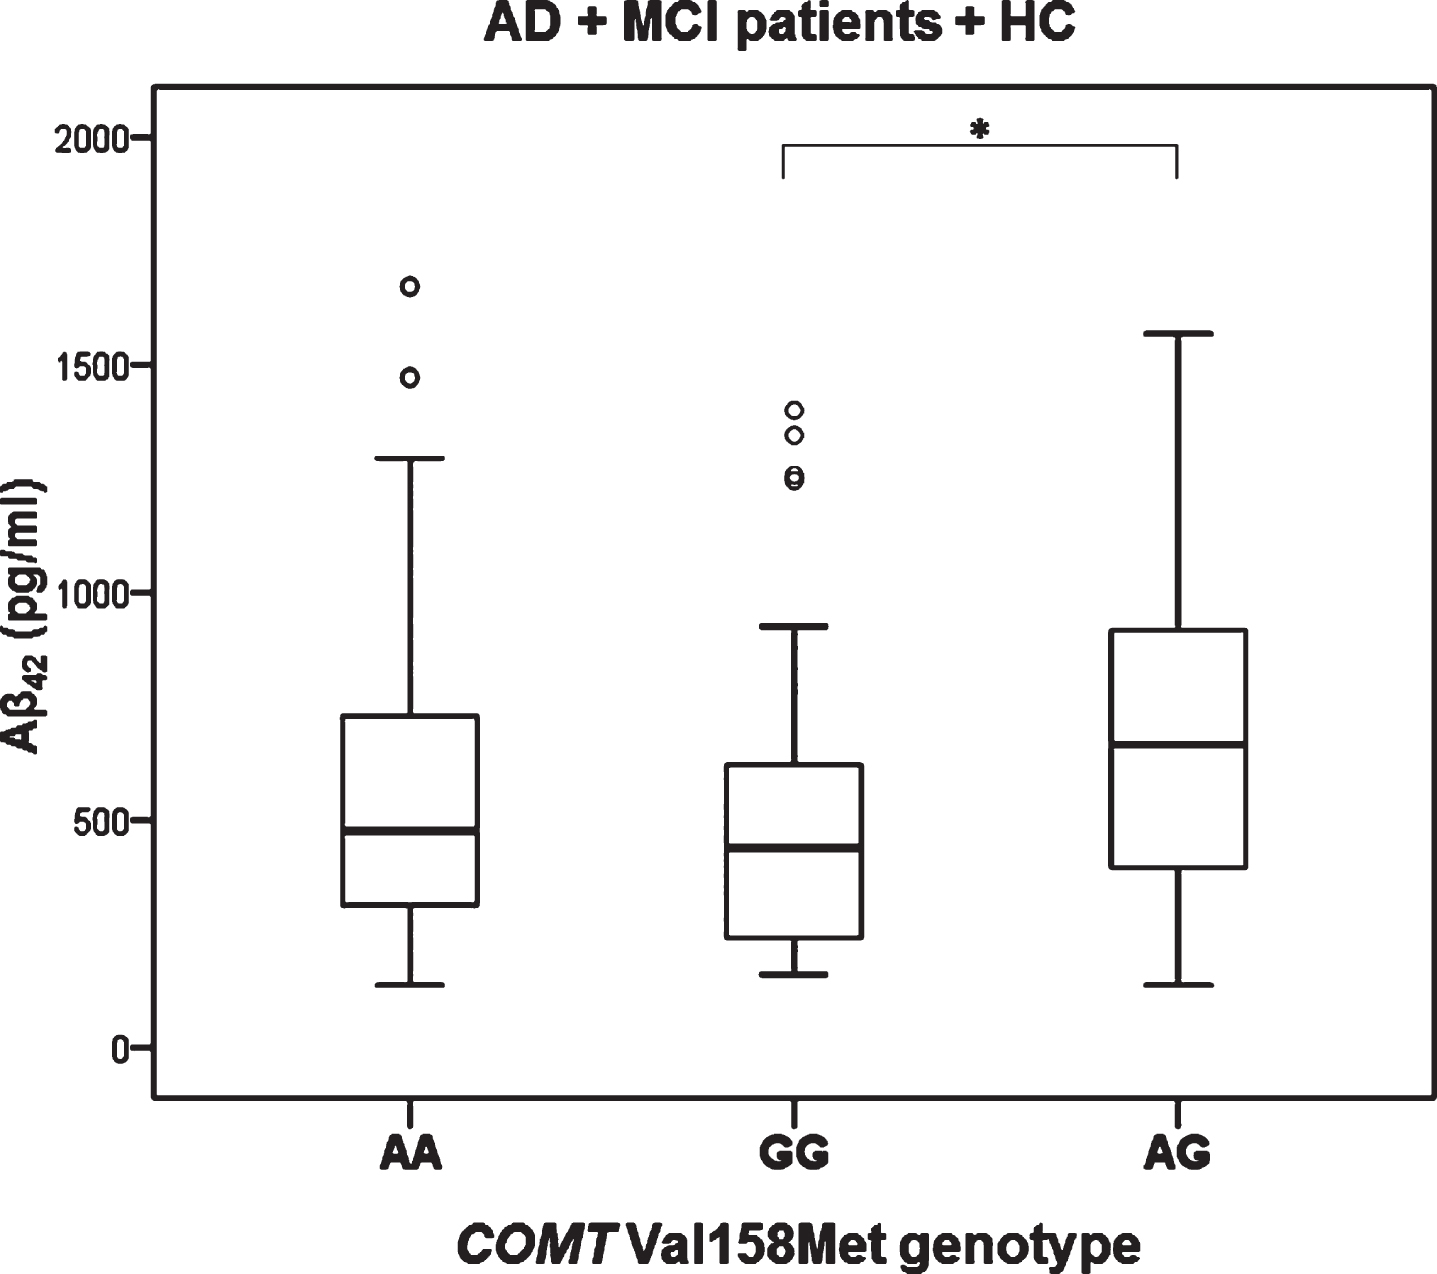 Levels of Aβ42 in AD, MCI patients and HC with different COMT Val158Met genotype. *p < 0.05.